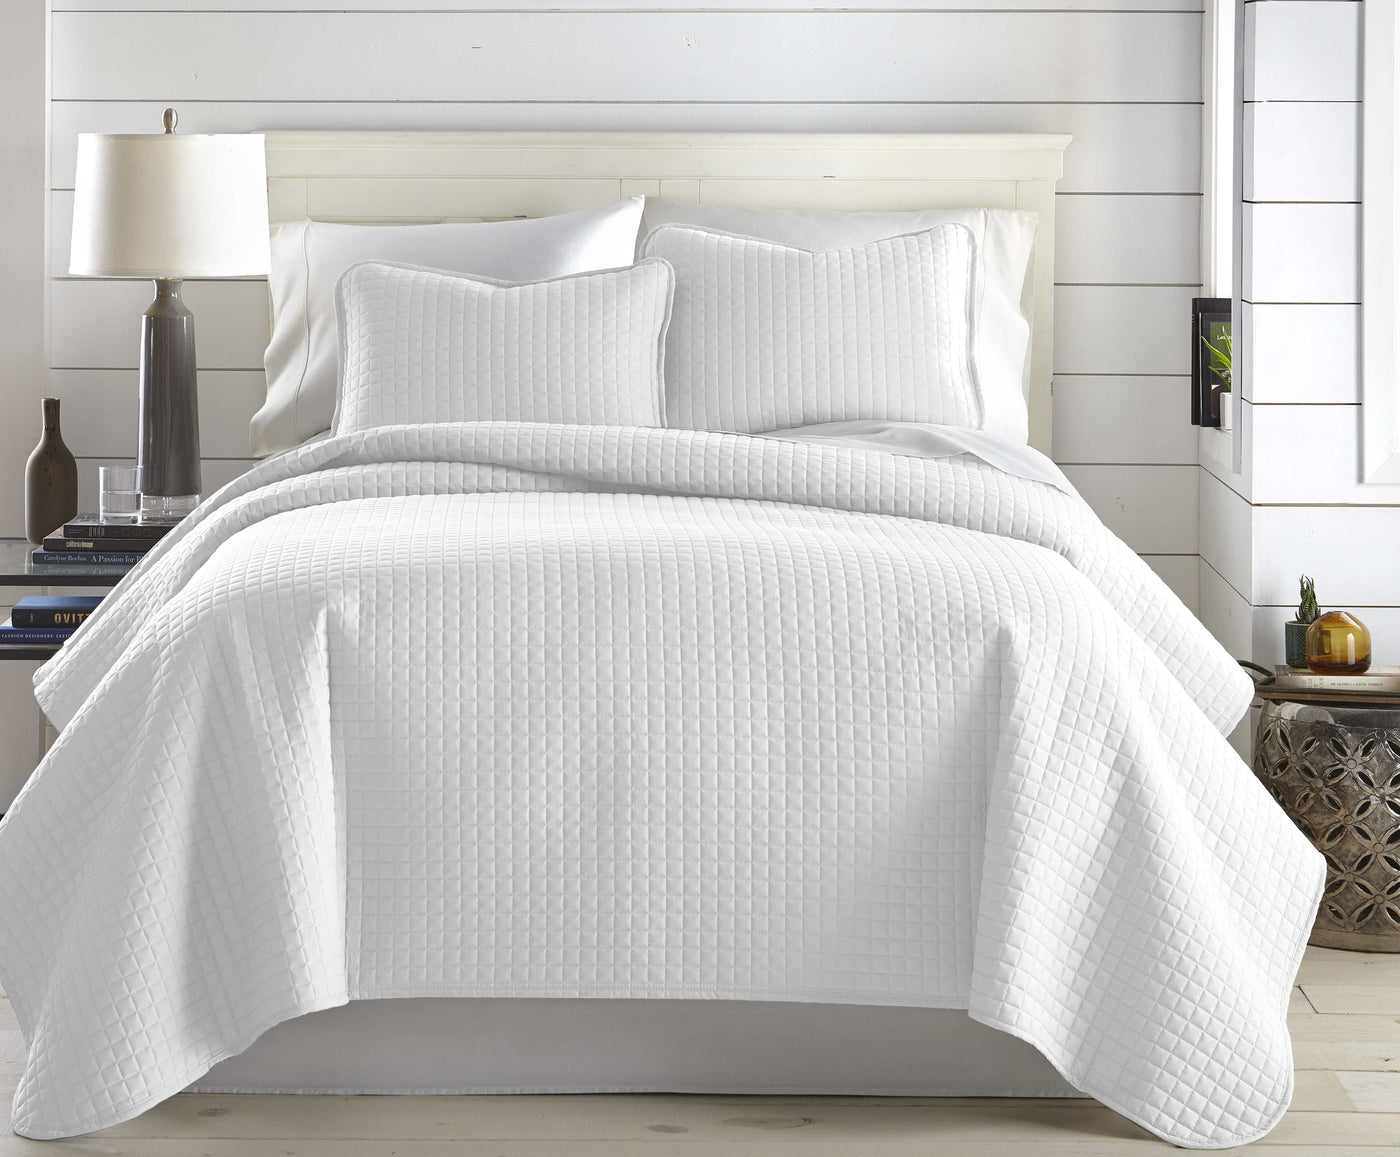  Front View Image of Vilano Quilt in White #color_vilano-white